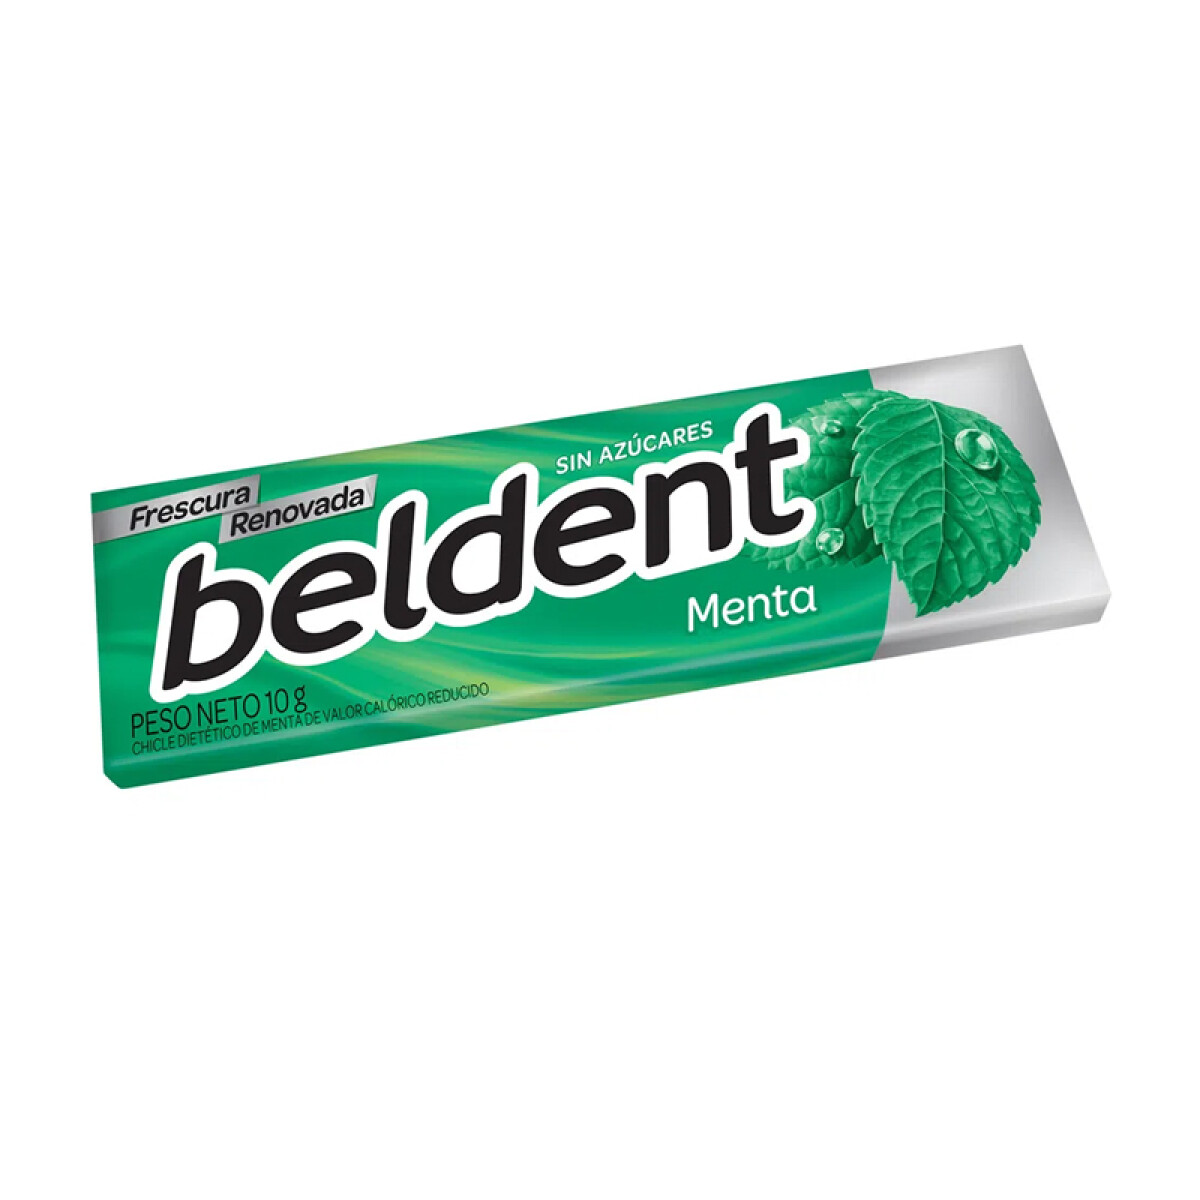 Chicle BELDENT x20 unidades - Menta 